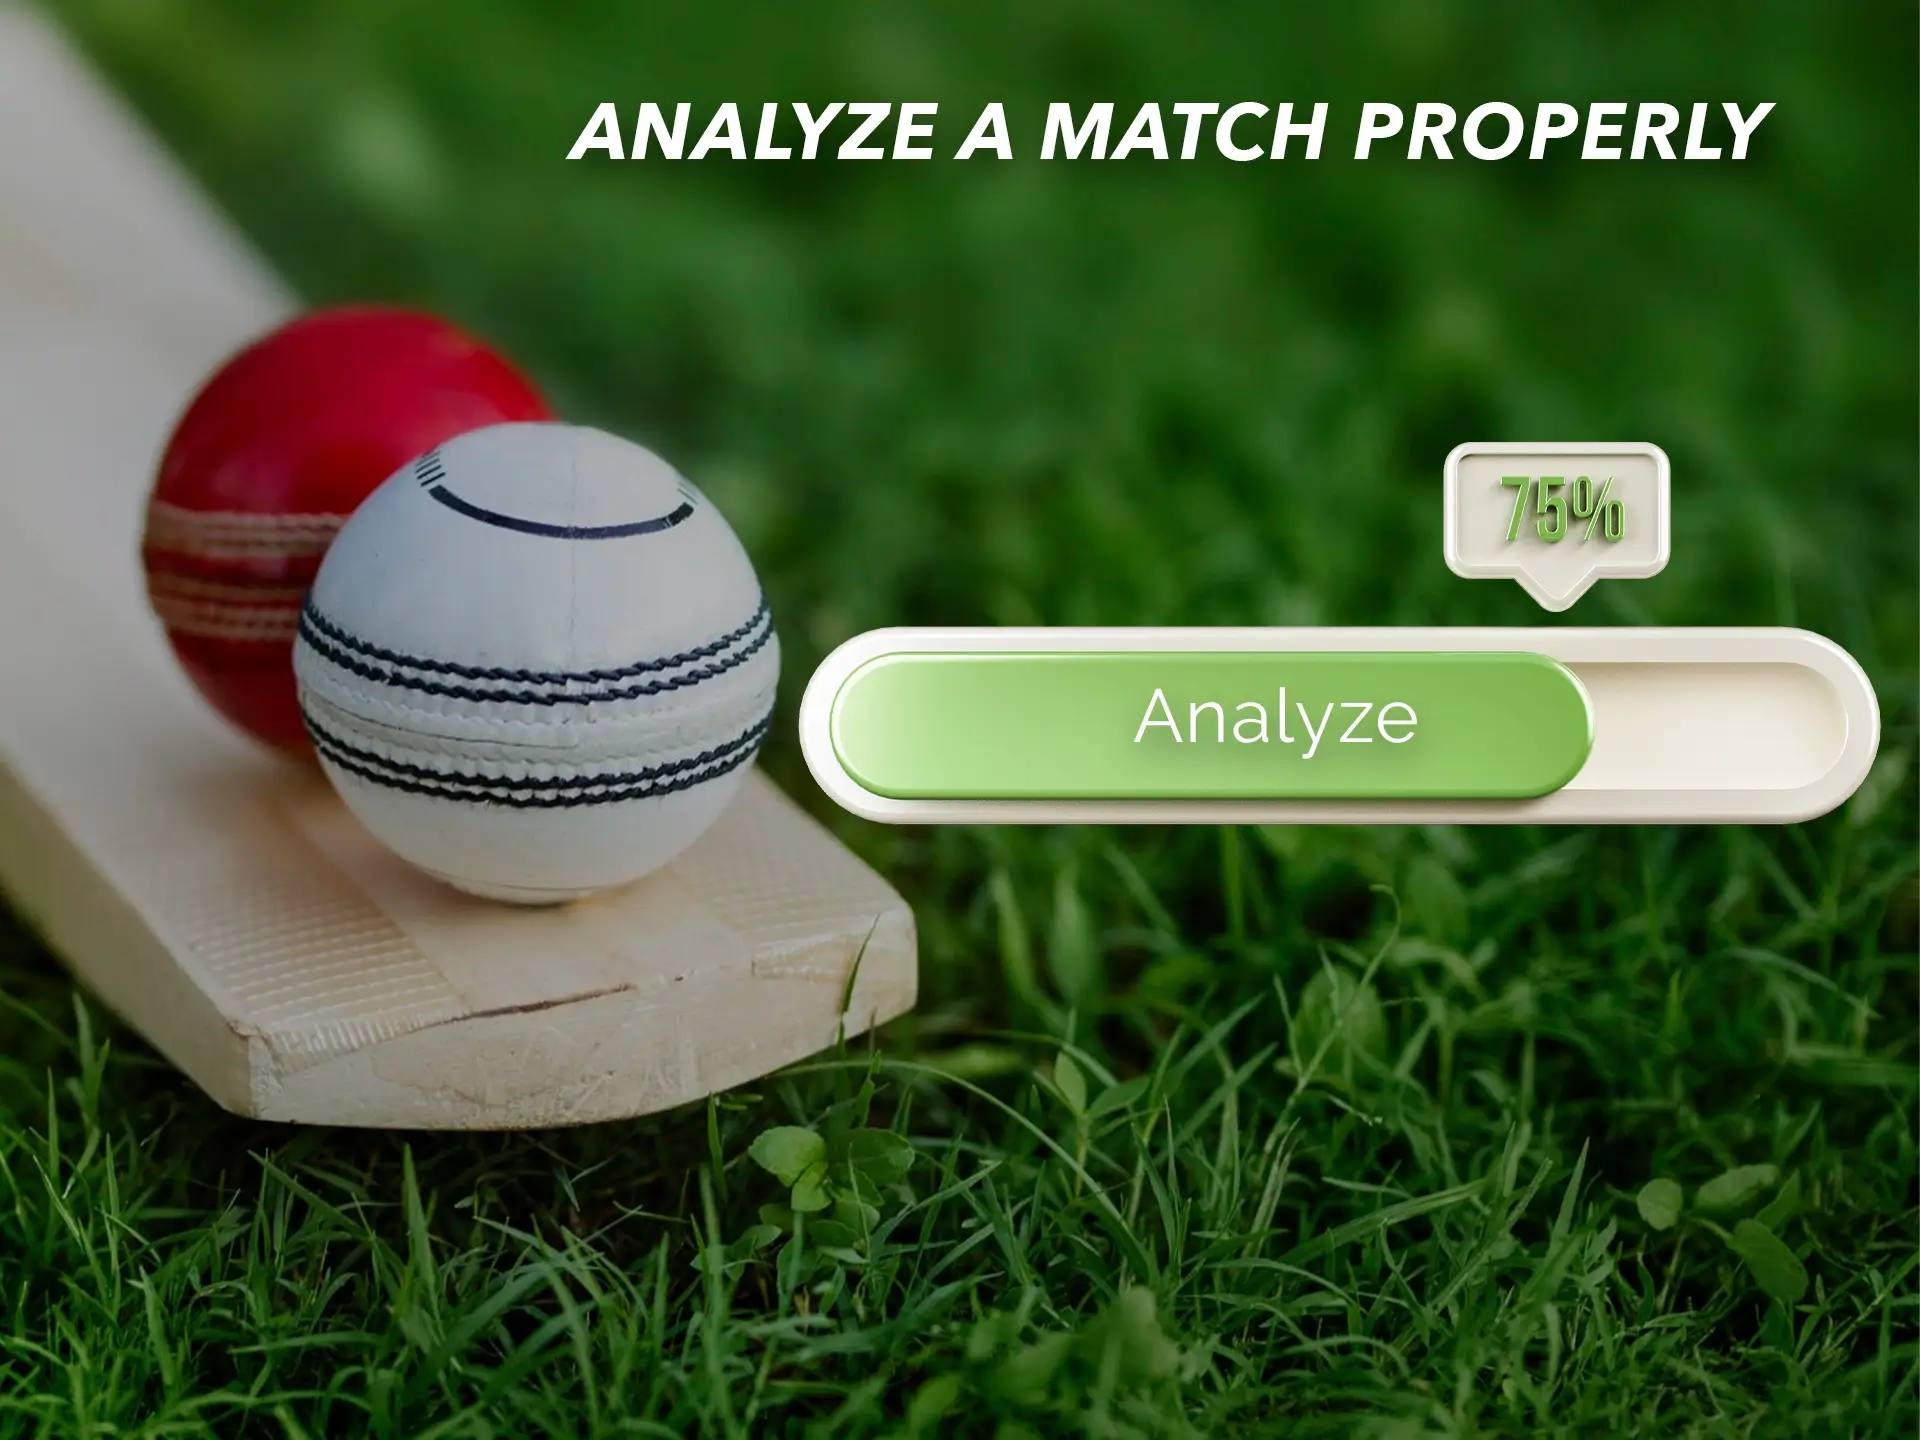 Do your own analysis to make correct cricket match predictions and outcomes.